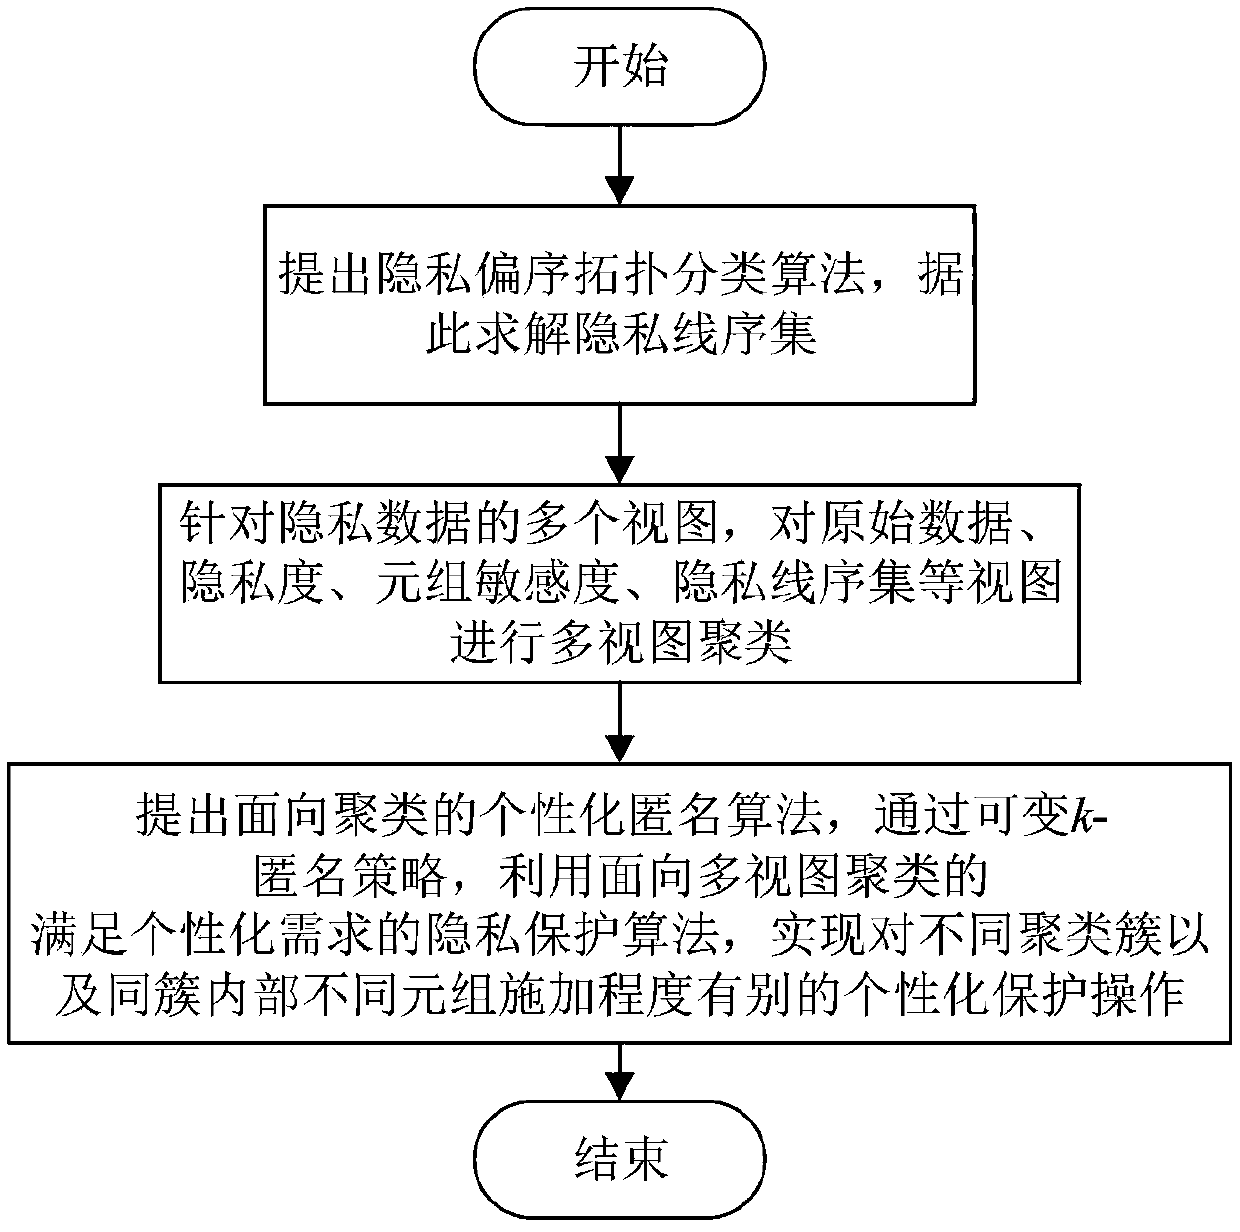 Multi-view clustering and mining oriented personal privacy protection method